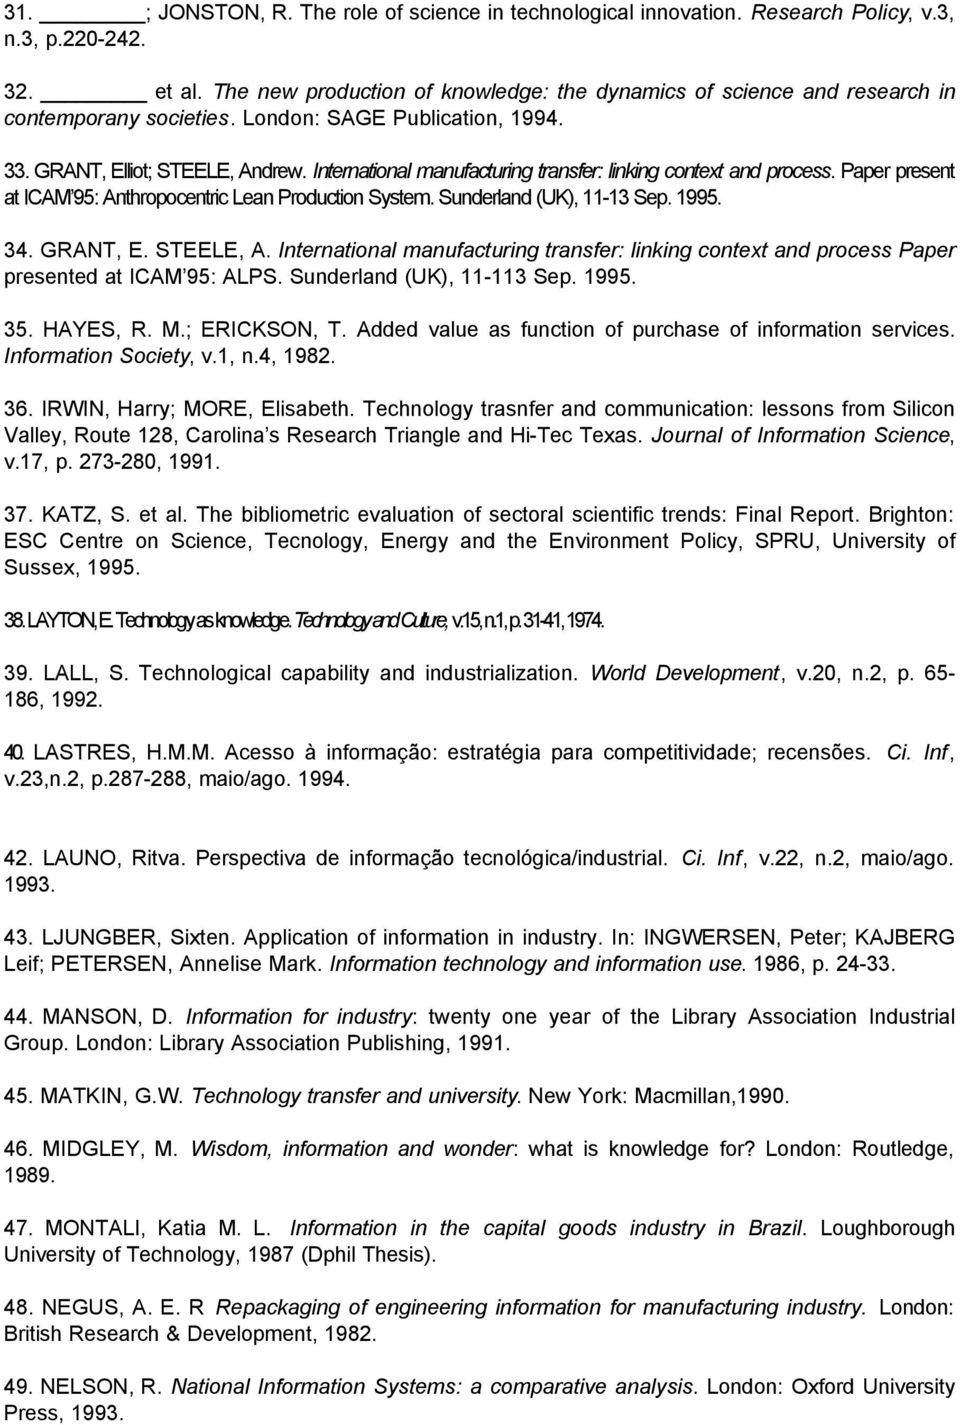 International manufacturing transfer: linking context and process. Paper present at ICAM 95: Anthropocentric Lean Production System. Sunderland (UK), 11-13 Sep. 1995. 34. GRANT, E. STEELE, A.